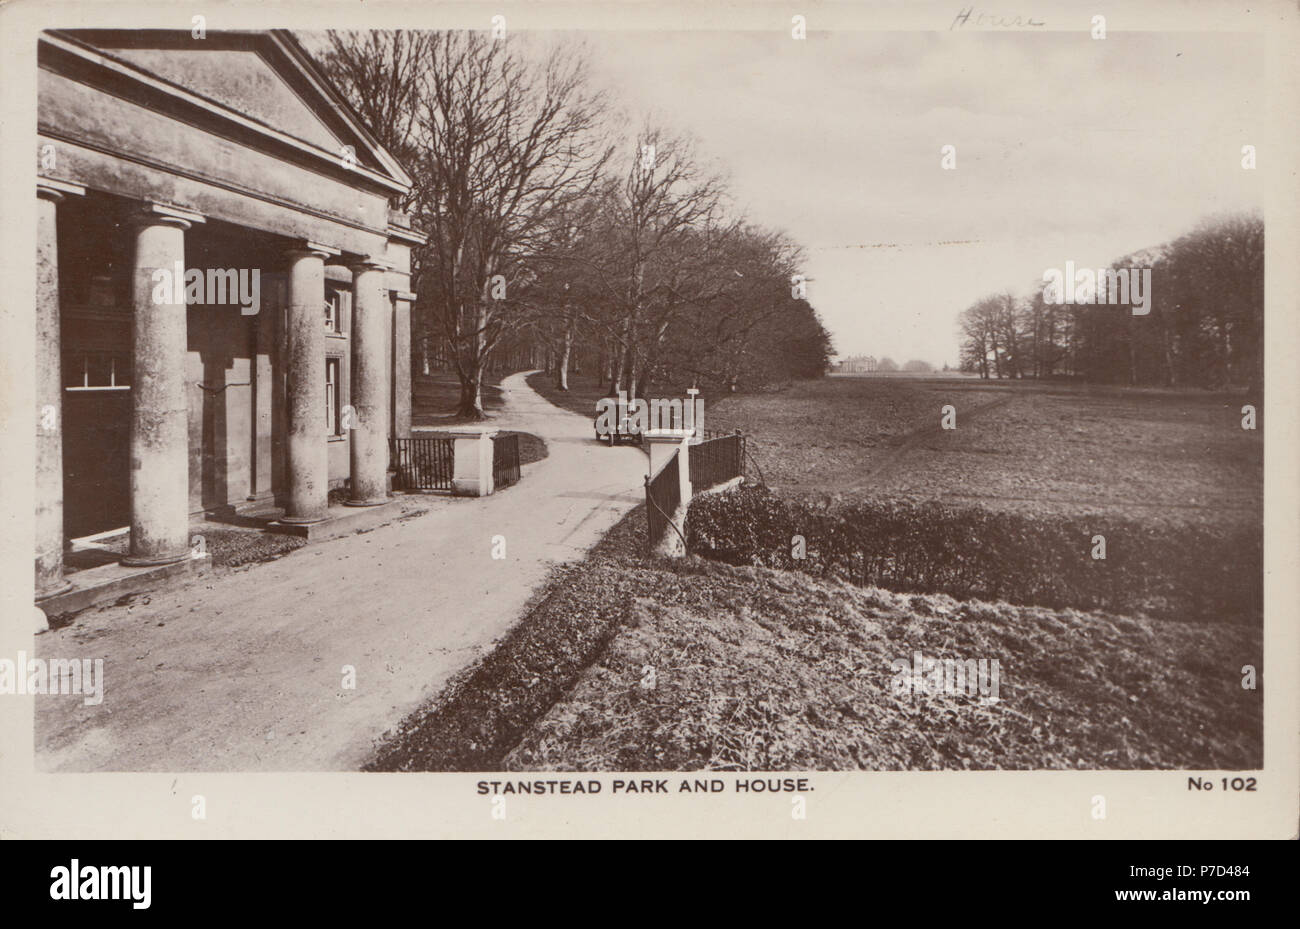 Vintage Photograph of Stansted House Stock Photo